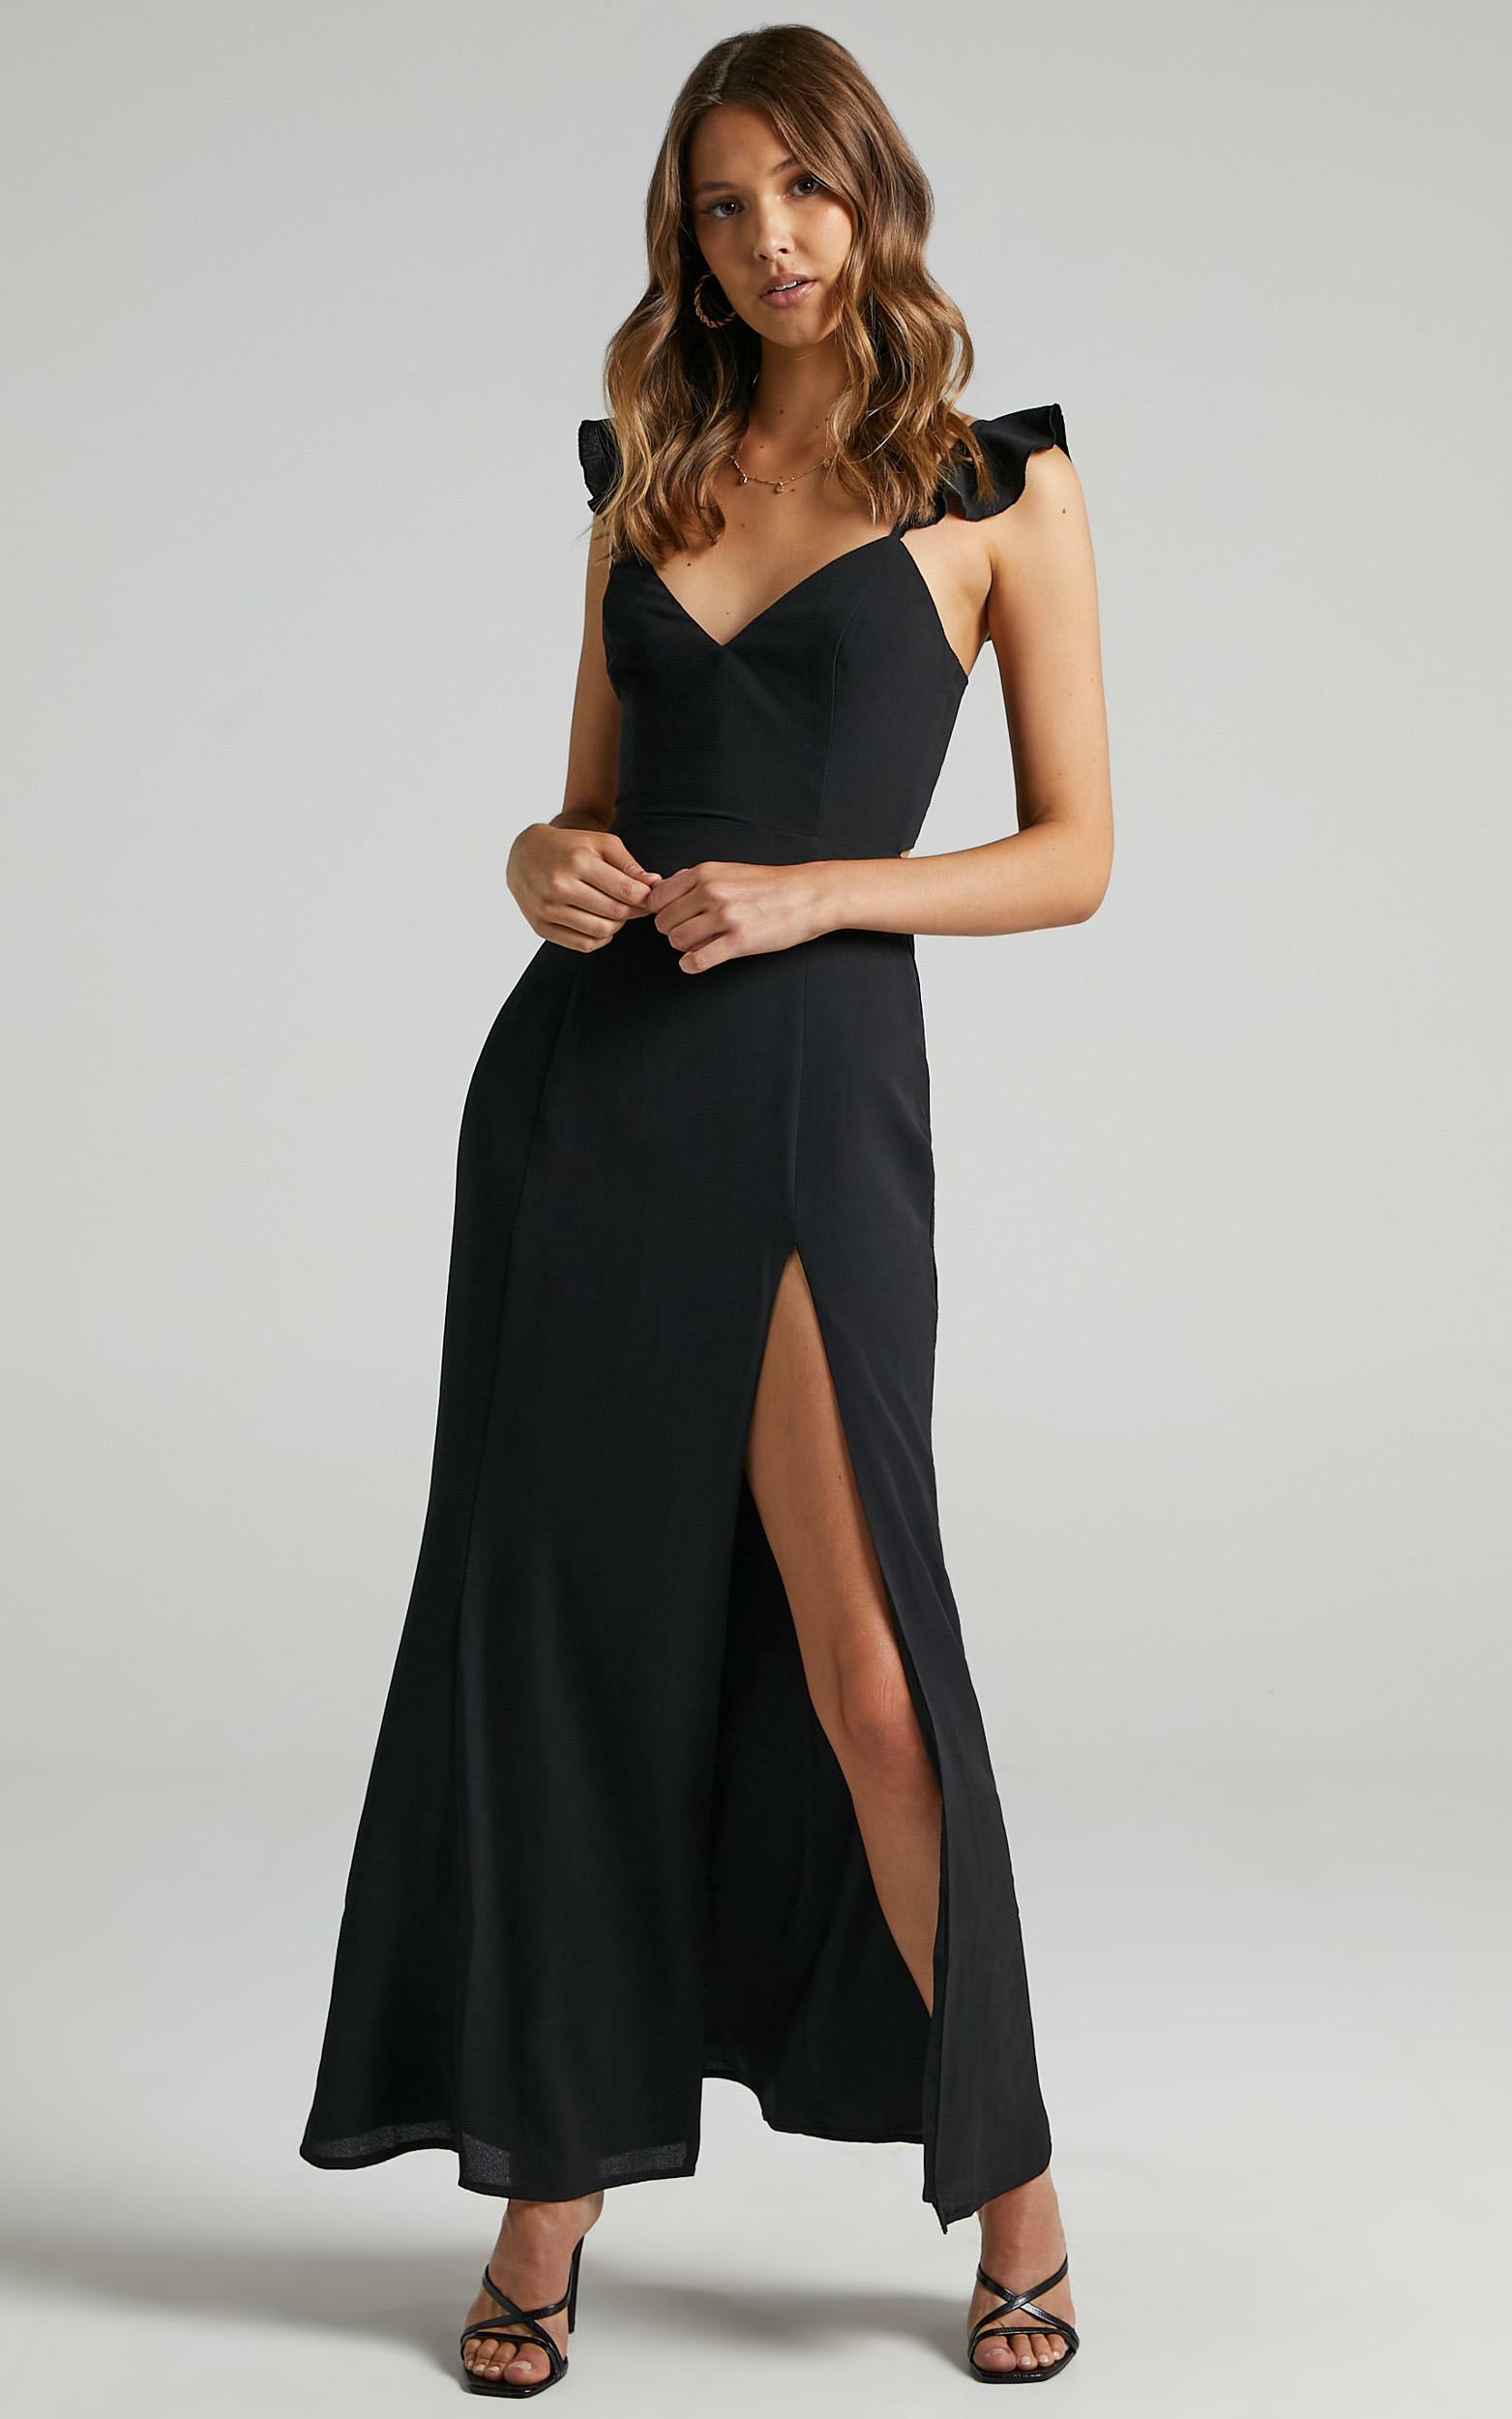 More Than This Dress In Black | Showpo